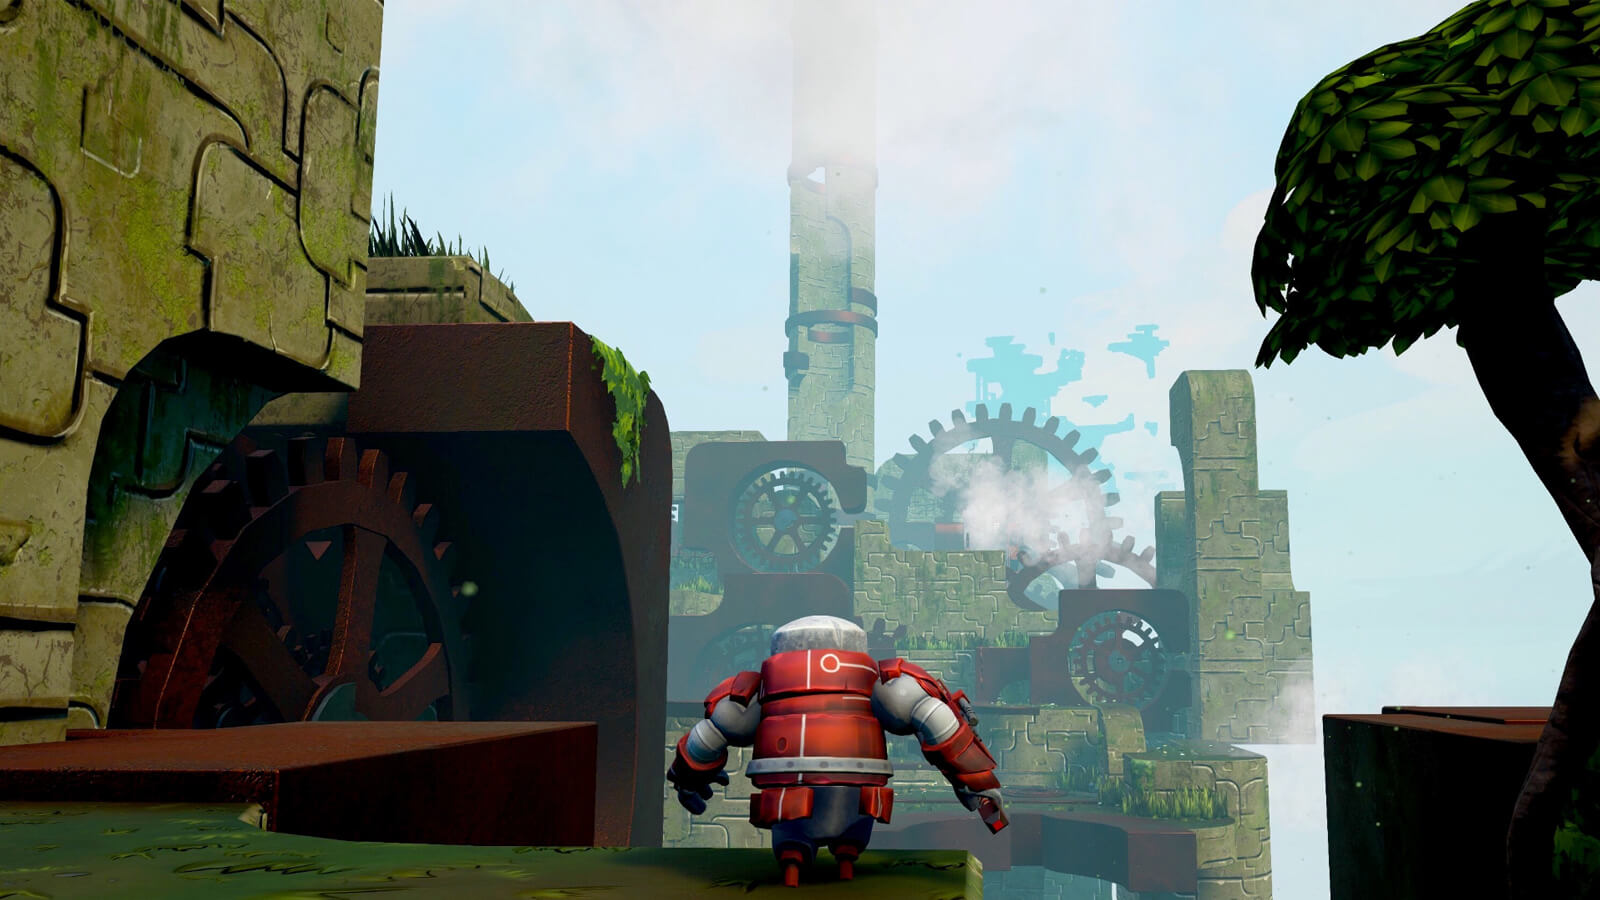 A red robot approaches the edge of a platform, an enormous, gear-powered stone structure in the distance. 